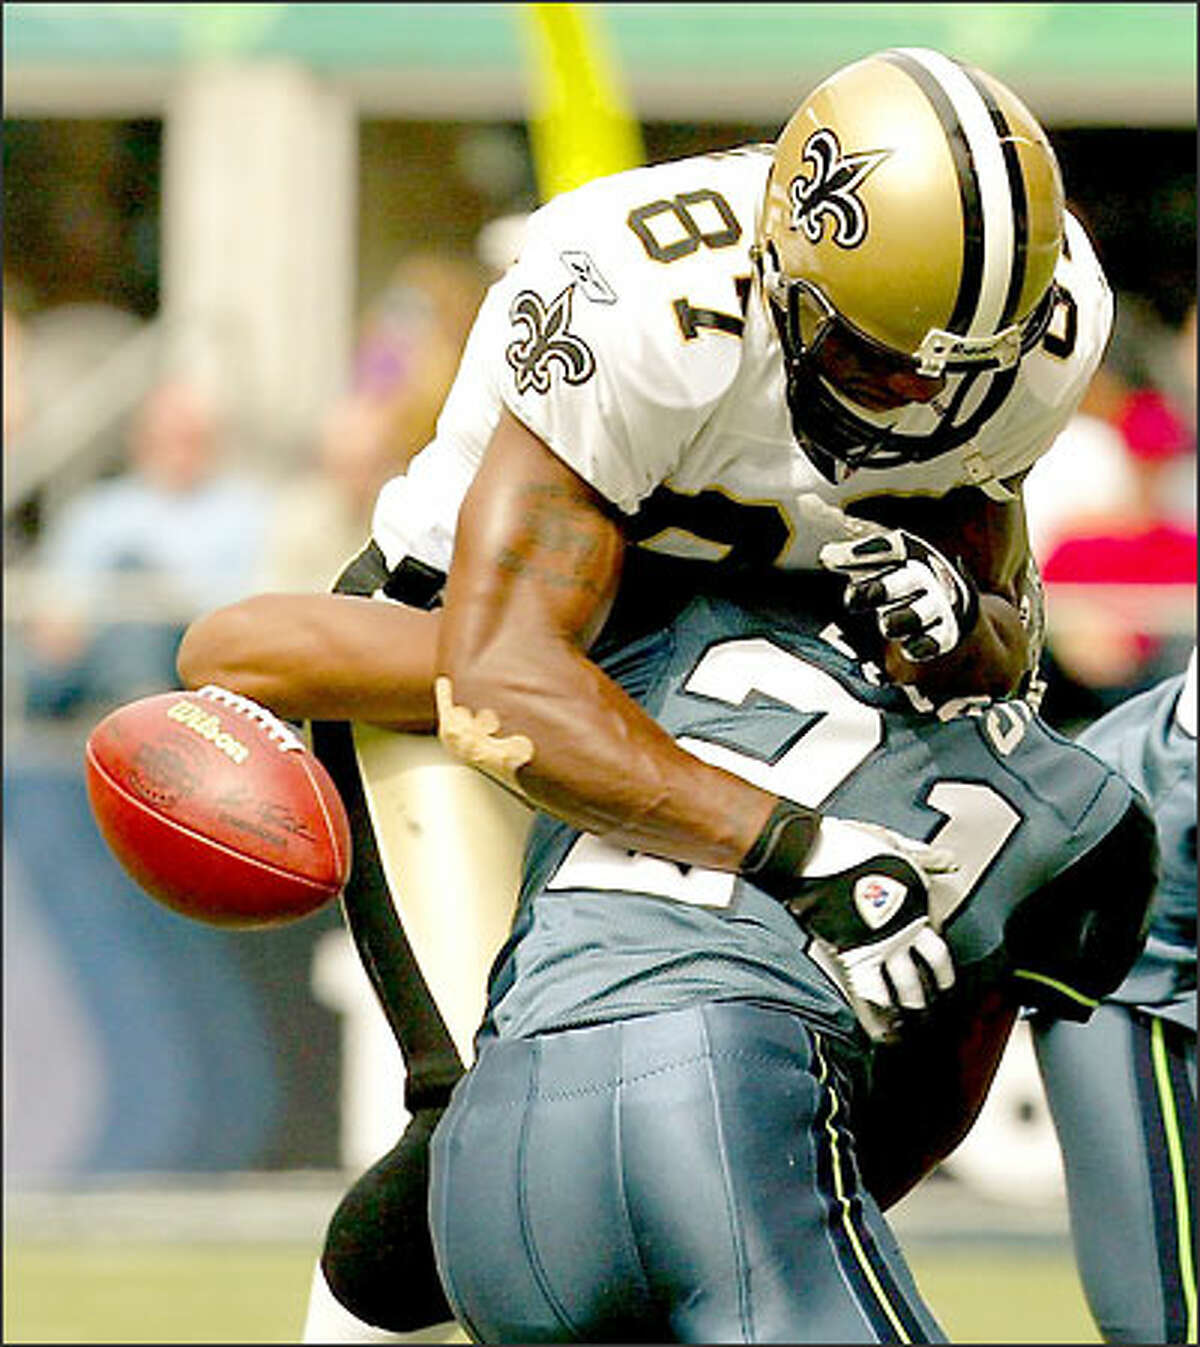 Cornerback Ken Lucas added to the hit list with this blow to Saints receiver Joe Horn.